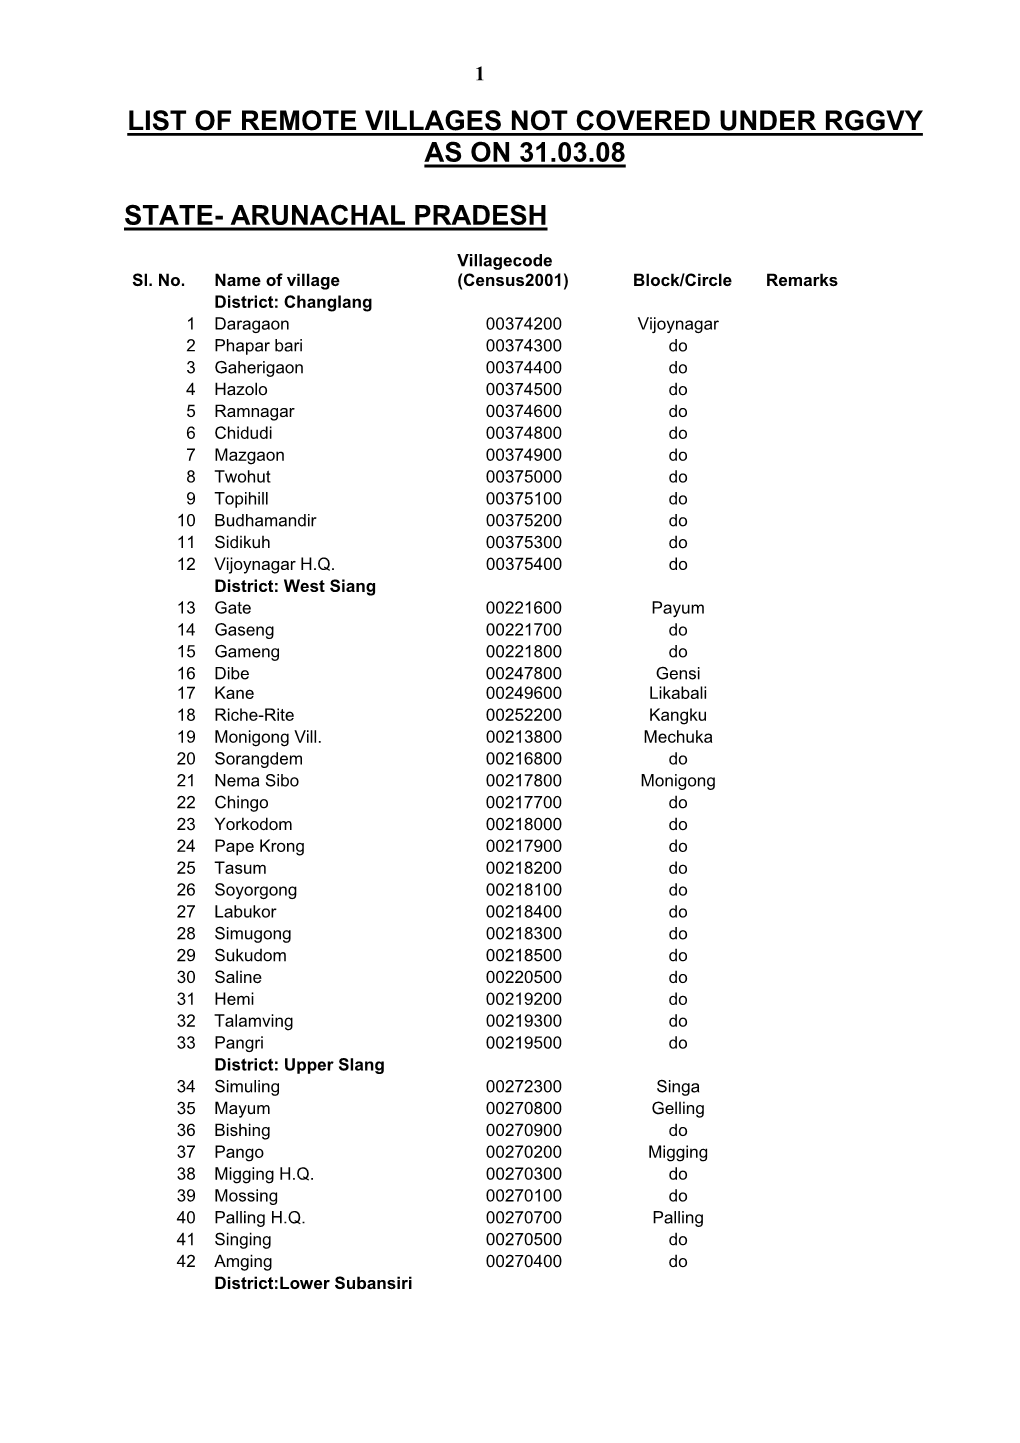 List of Remote Villages Not Covered Under Rggvy As on 31.03.08